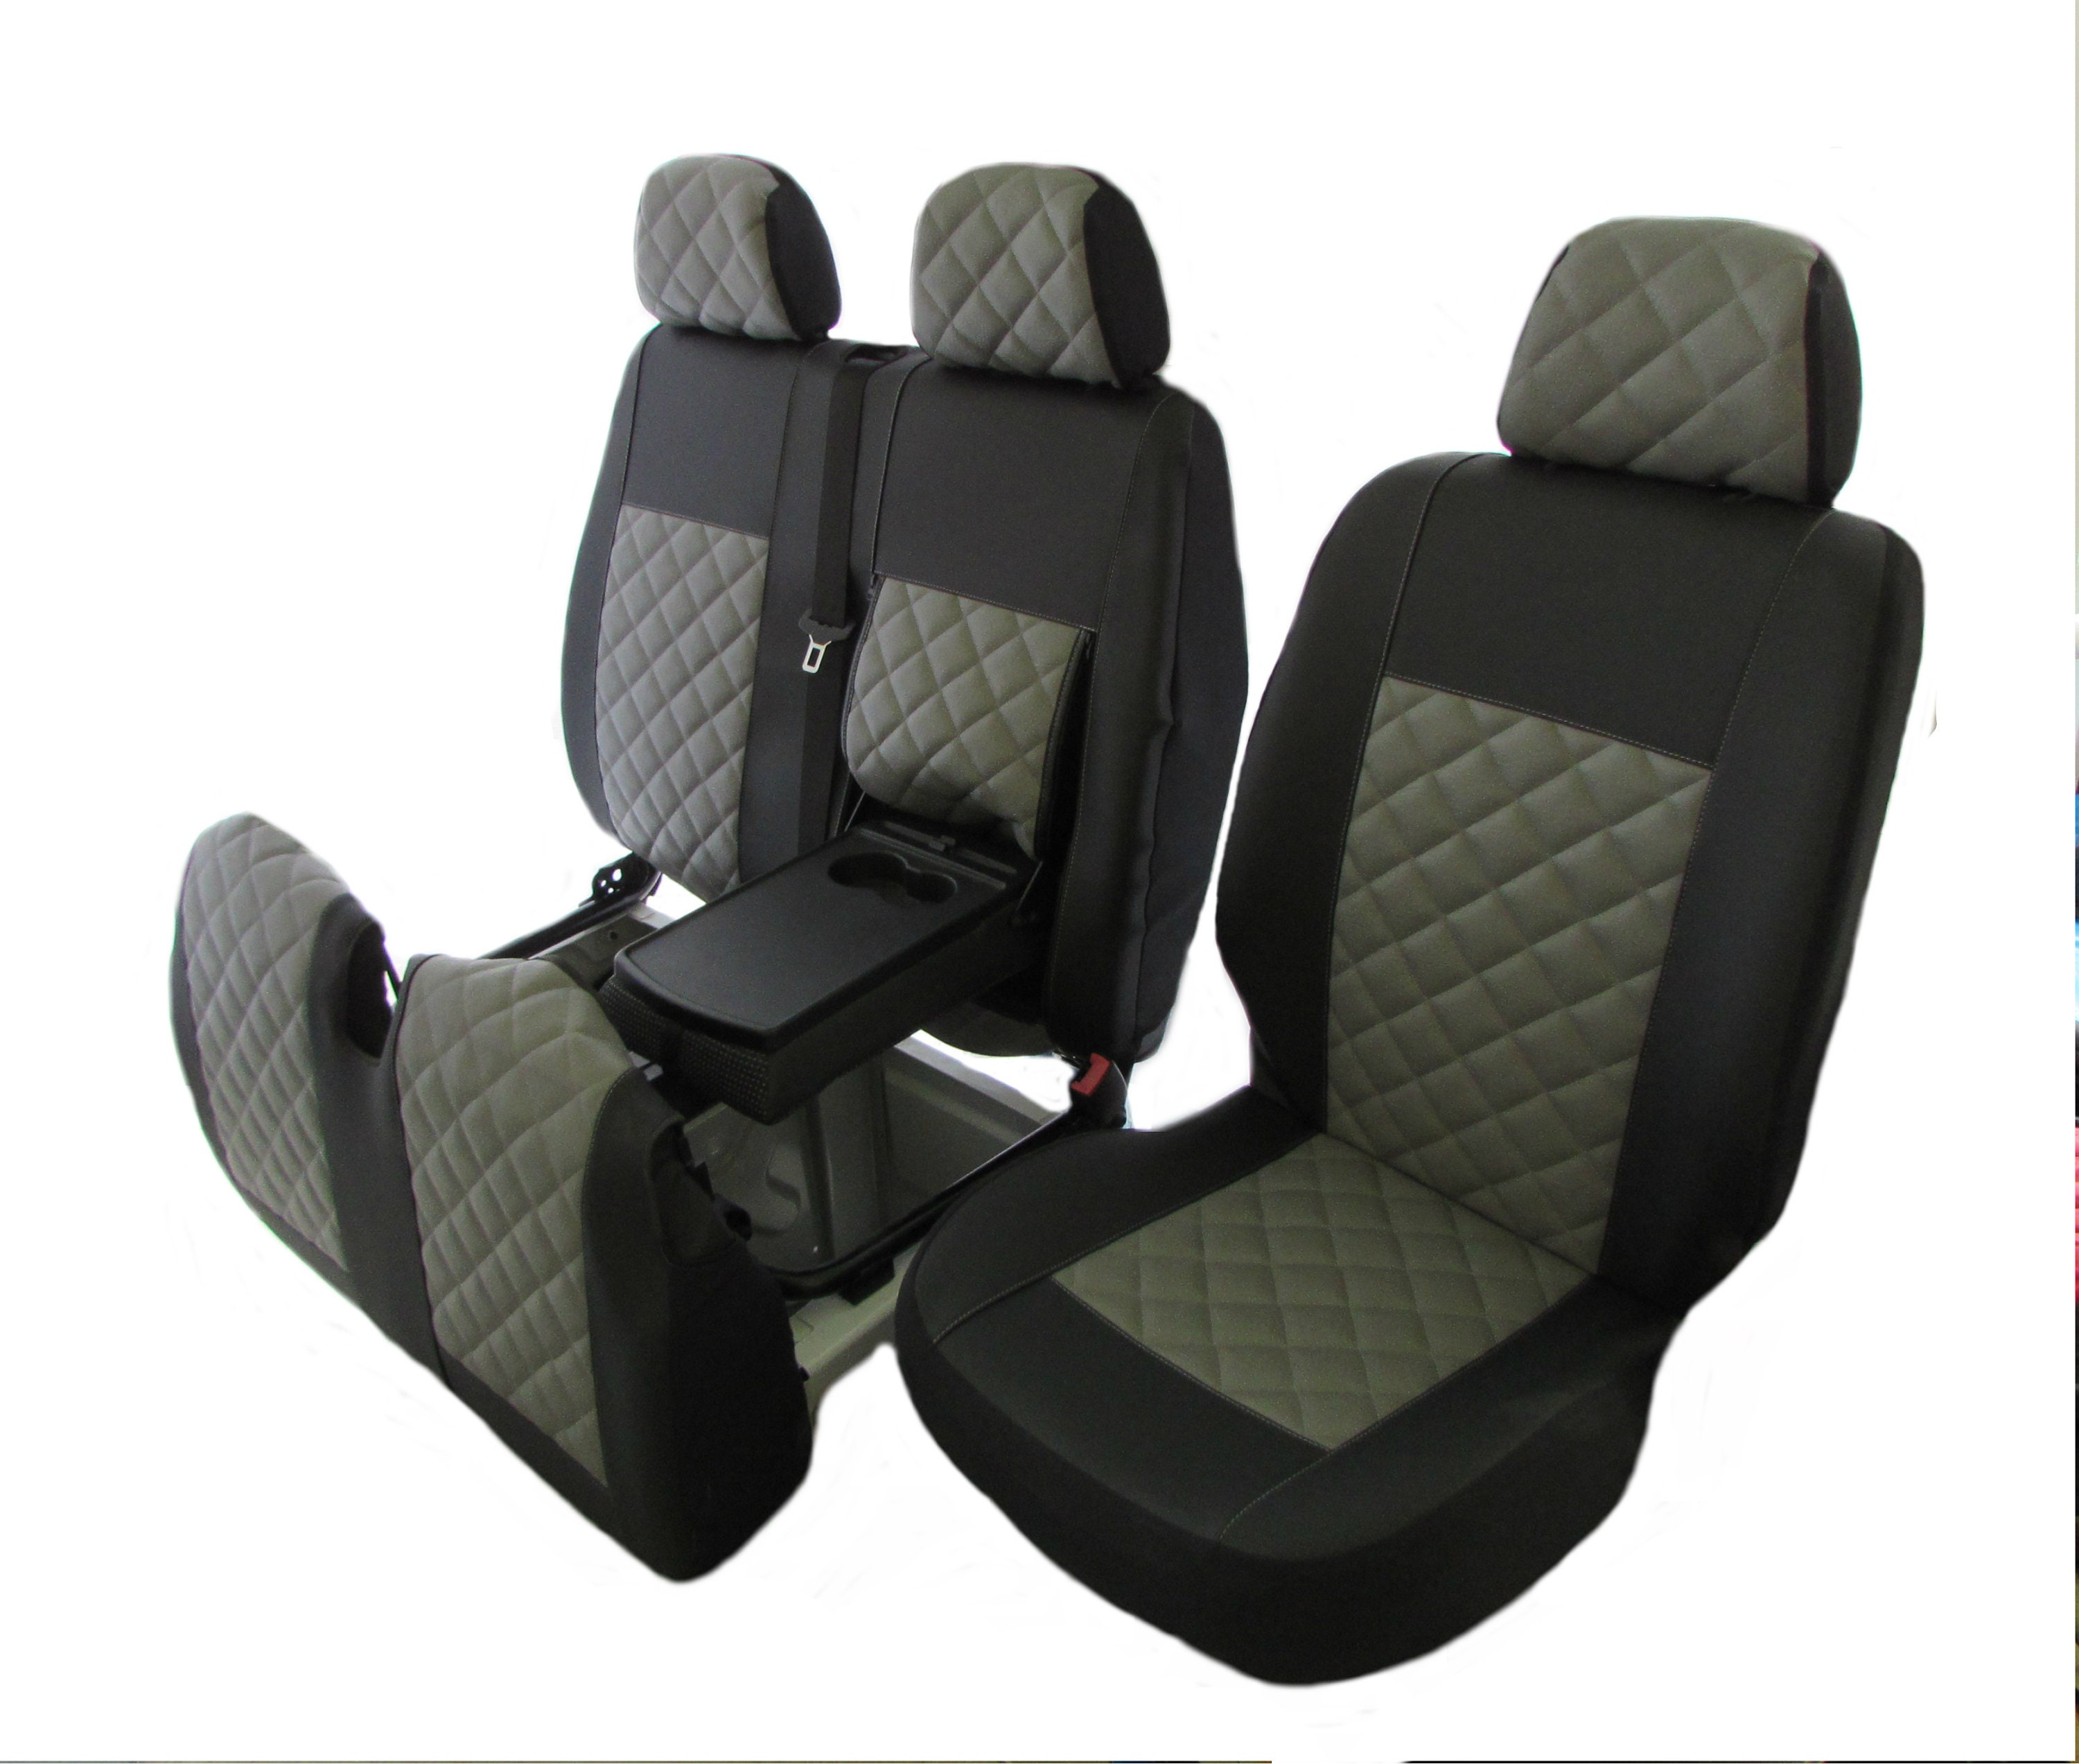 DVSWRB Car Seat Covers for Volkswagen VW ID.3 Pure/Pro/Plus/S/Max 2019-pr Car Seat Cushions Protectors Universal Fit Leather Car Accessories for Rear Complete Set 5 Seats Color: Black, Beige 